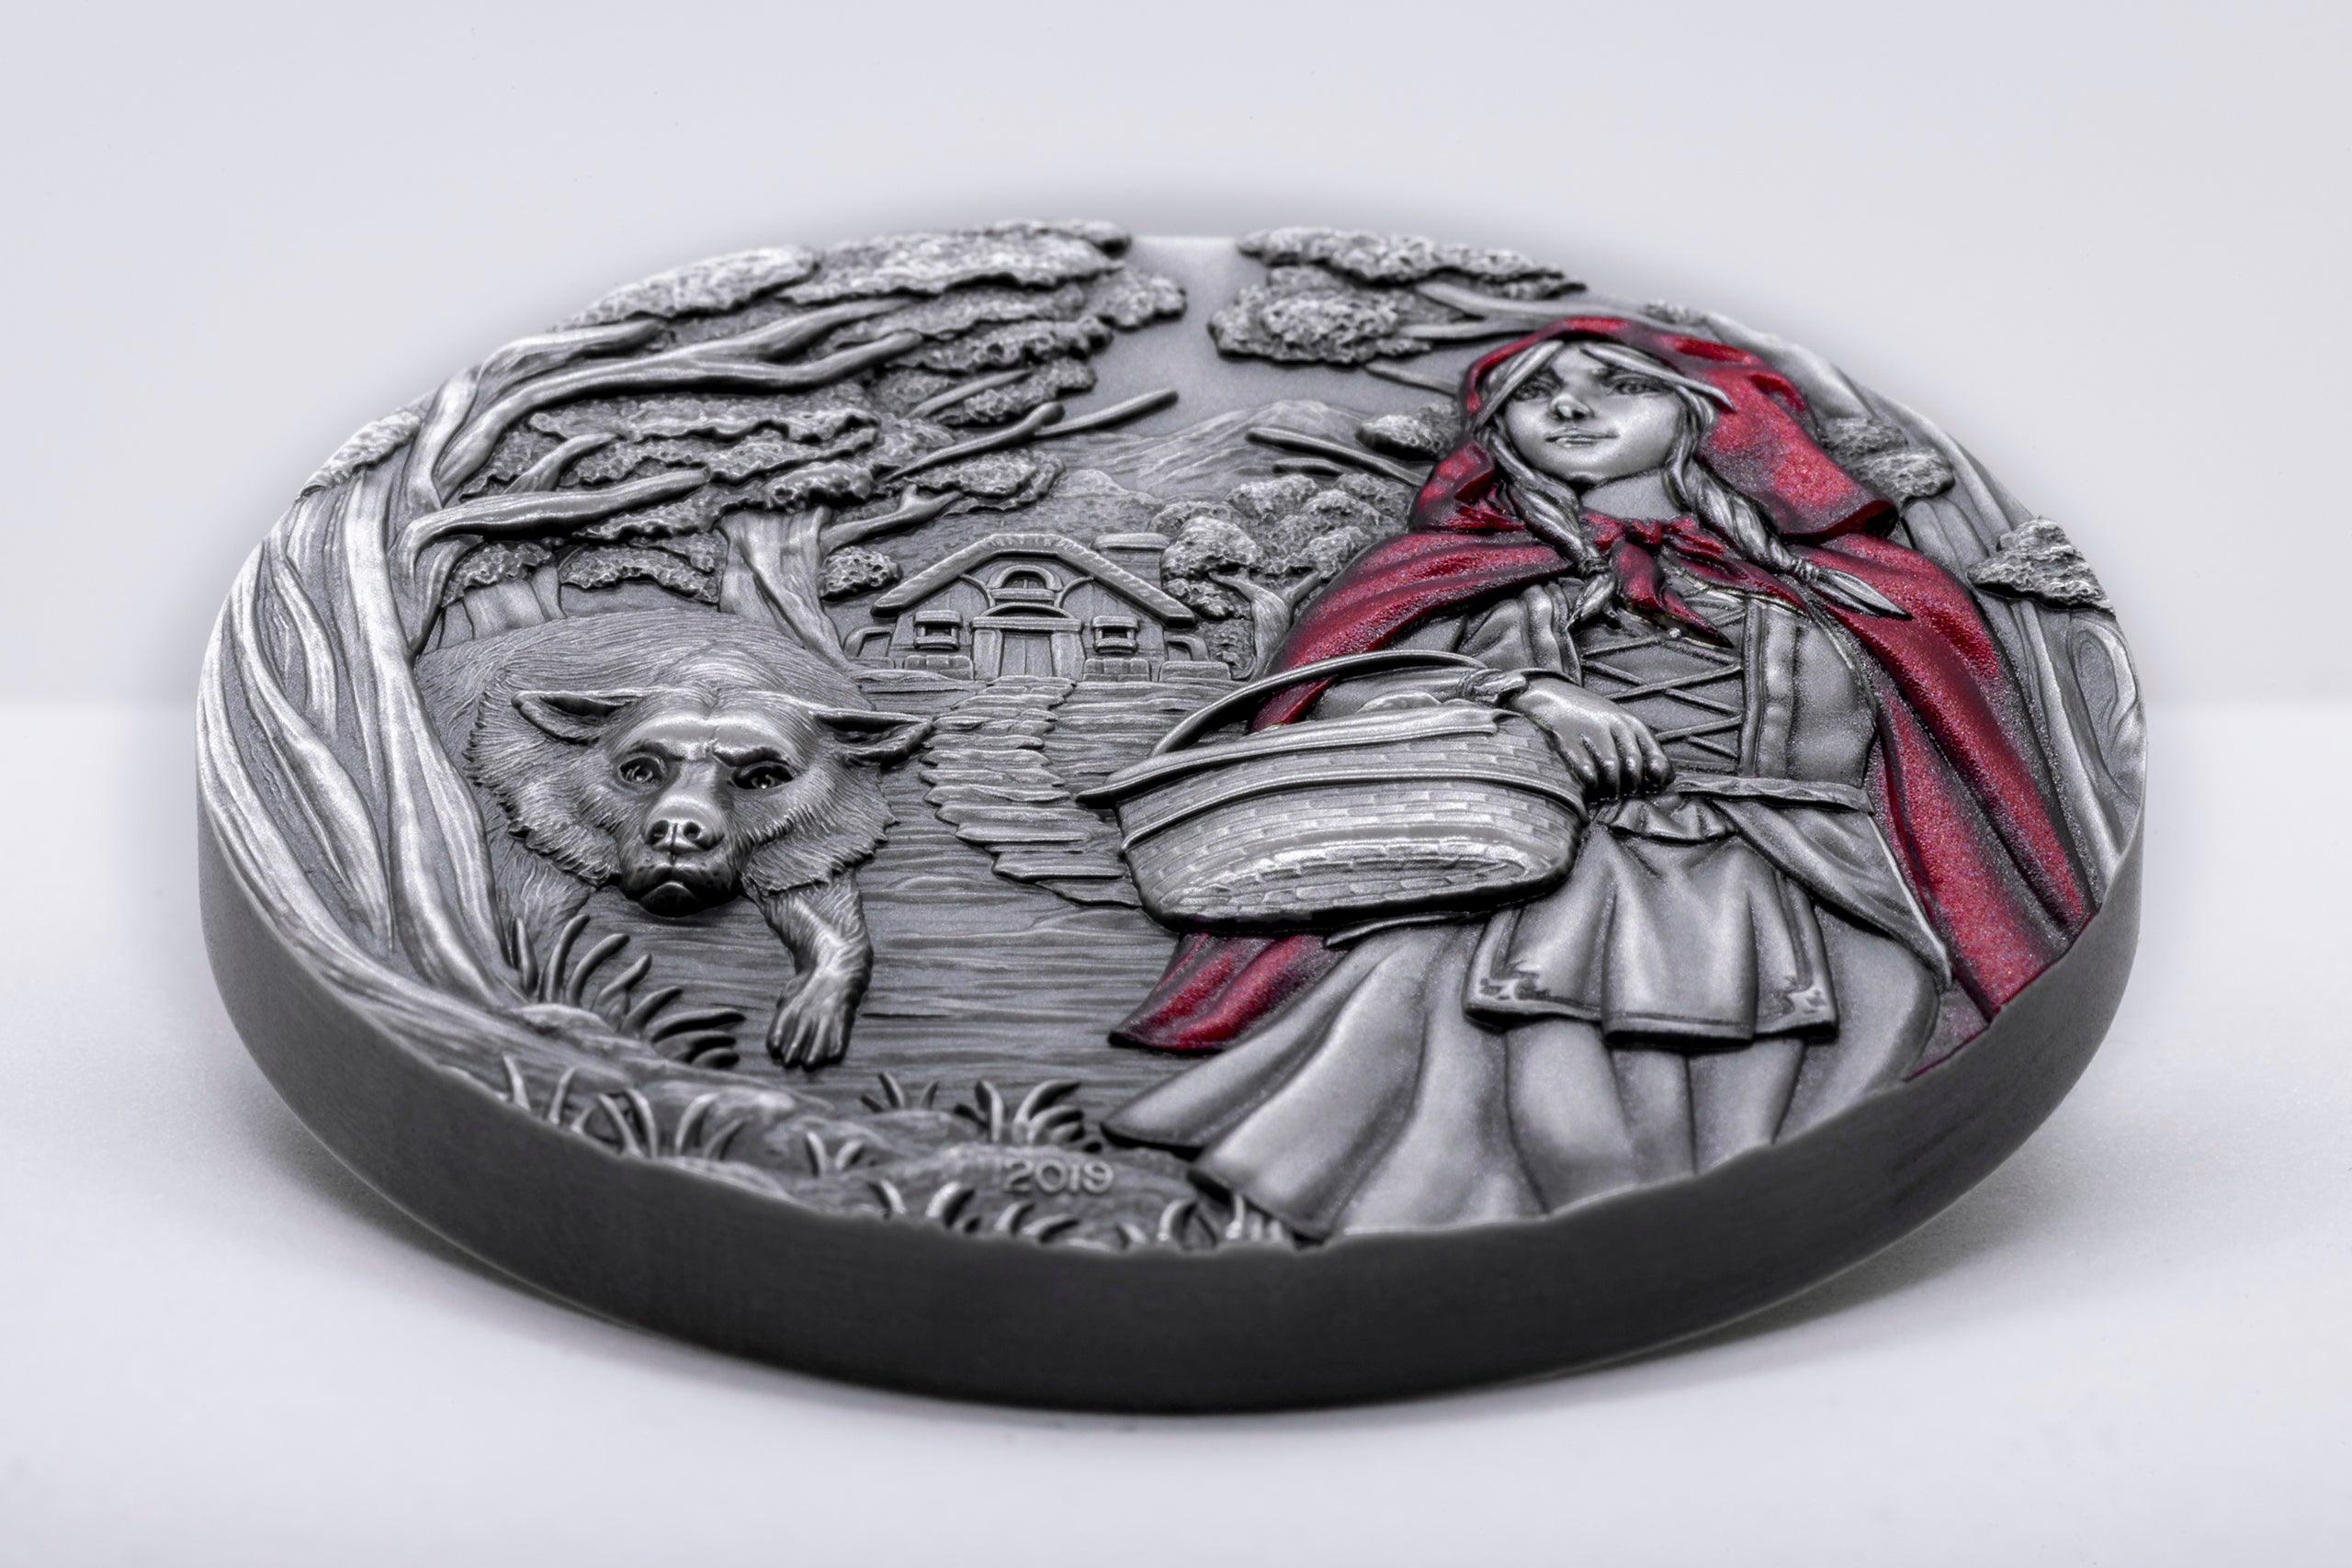 LITTLE RED RIDING HOOD Fairy Tales Fables 3 Oz Silver Coin 20$ Cook Islands 2019 - PARTHAVA COIN